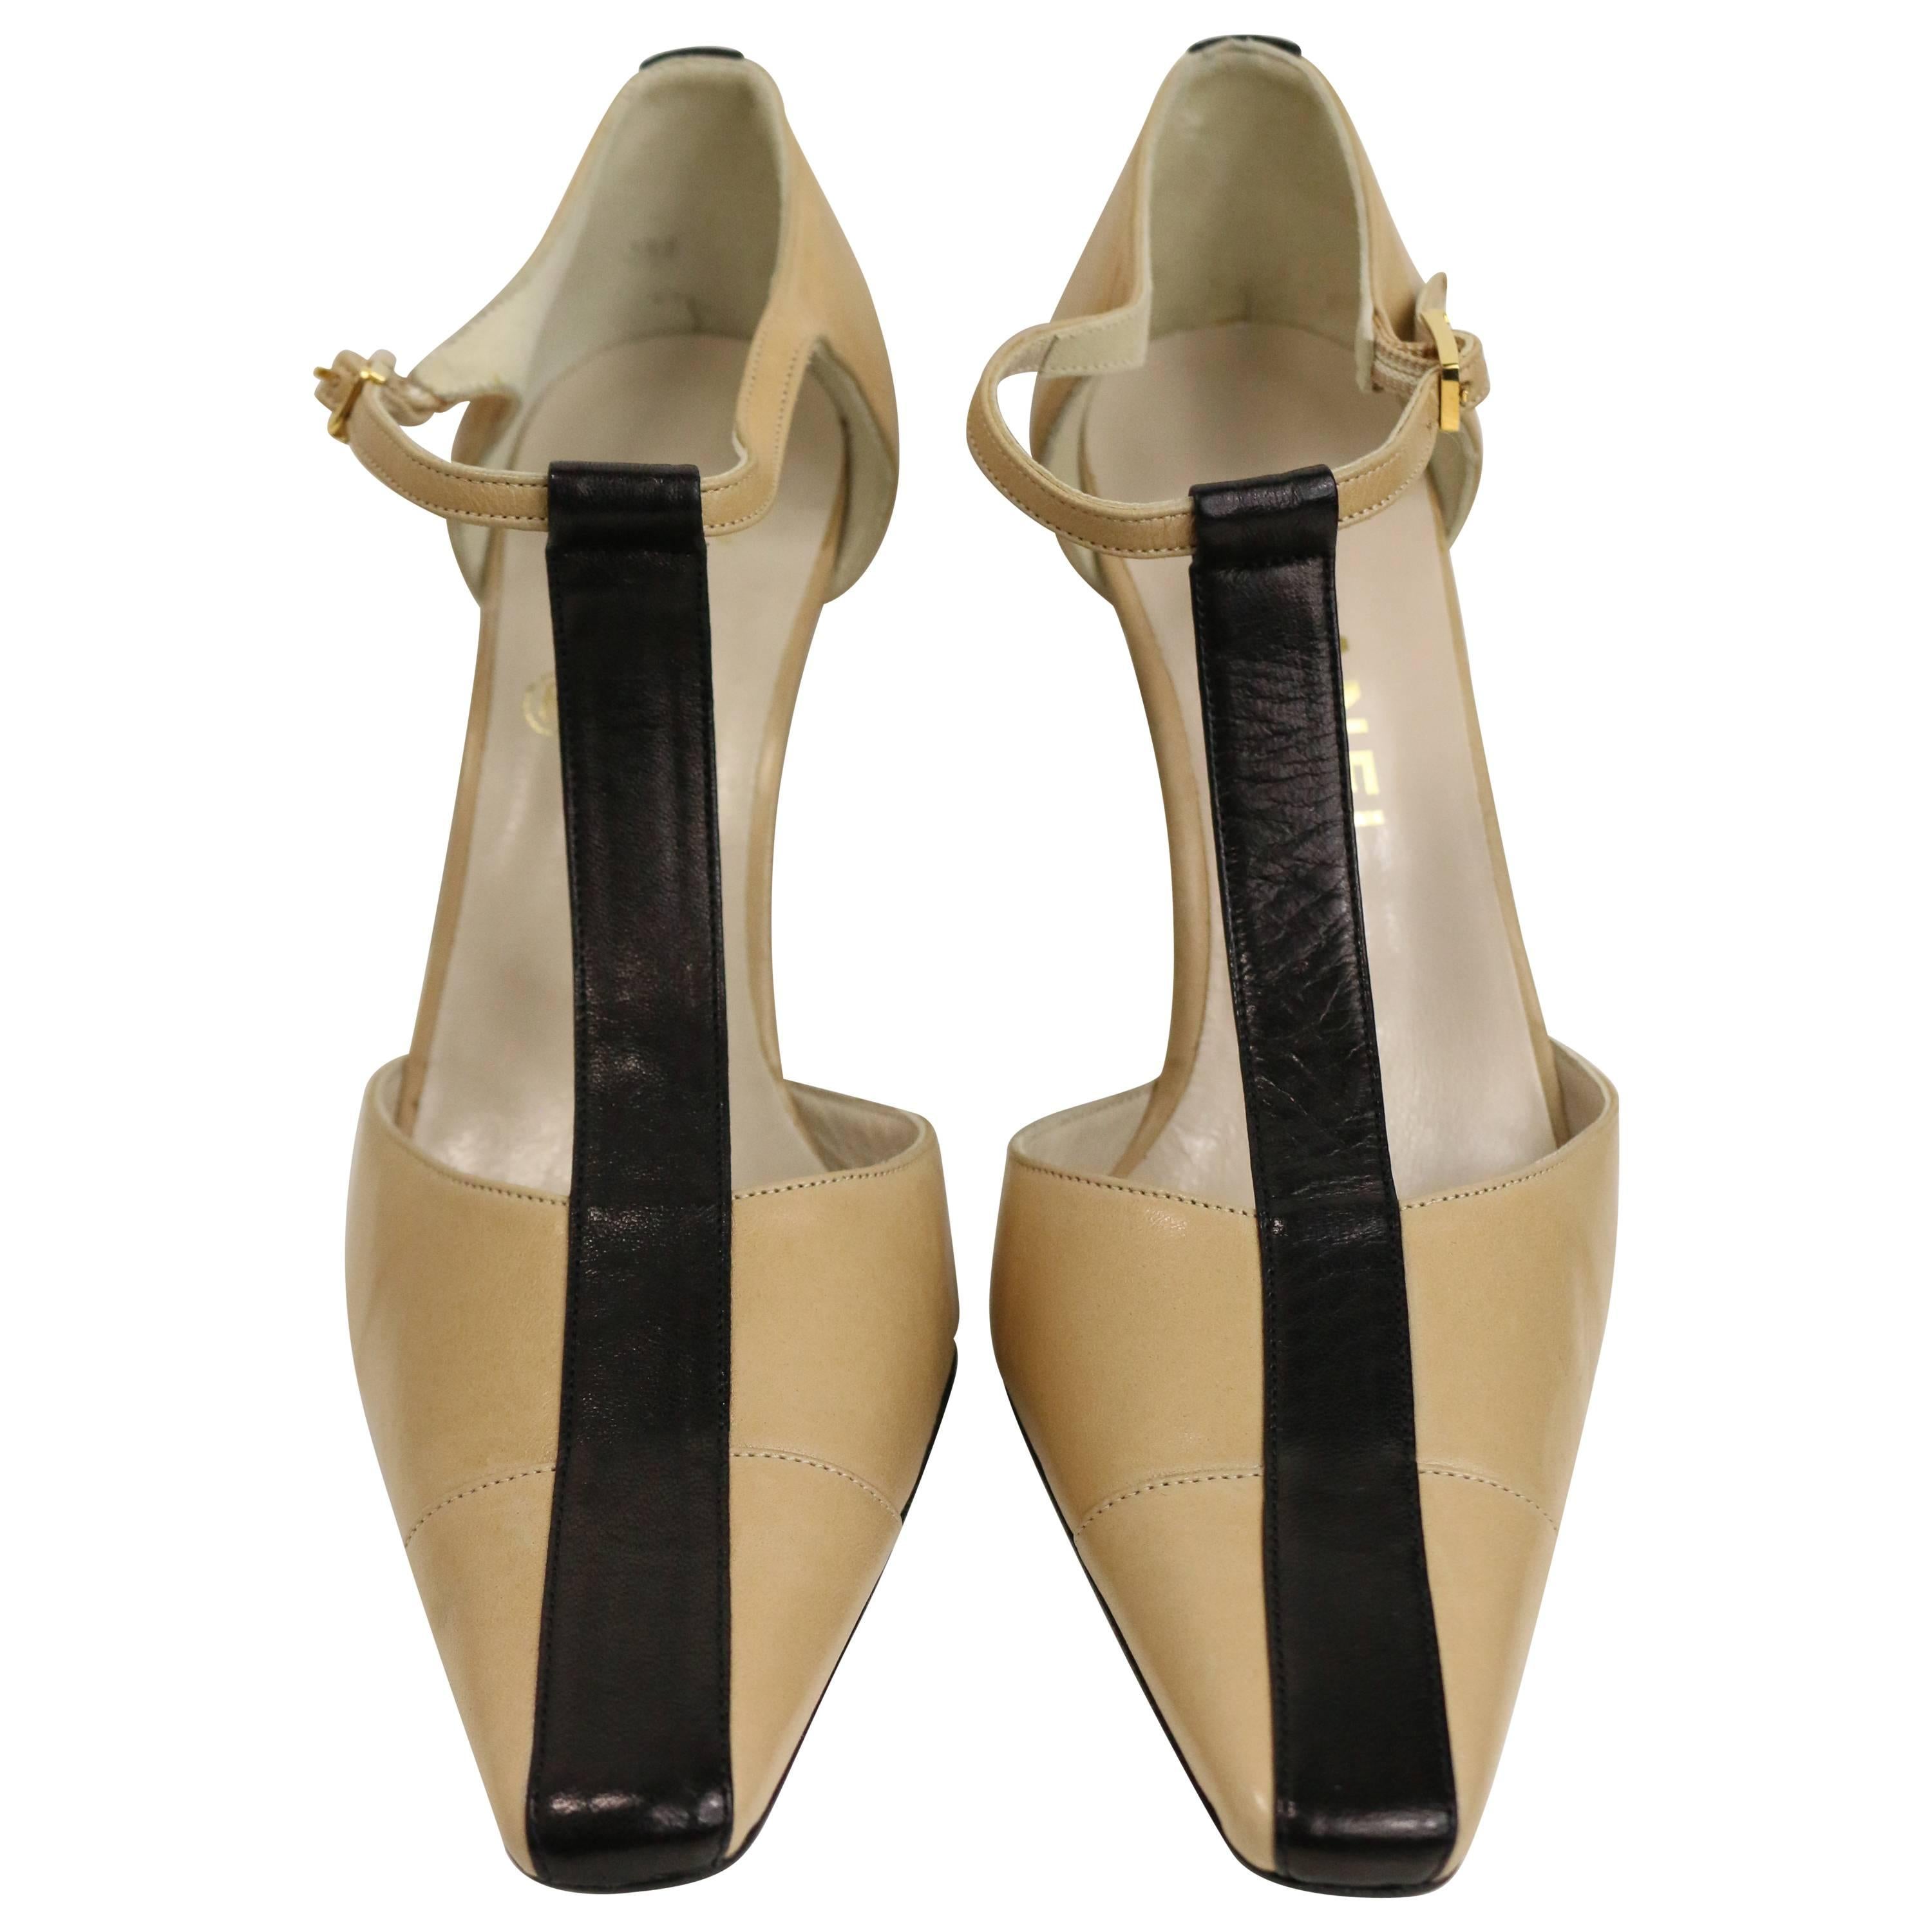 Slingback Shoes Chanel - IT 36.5, buy pre-owned at 620 EUR